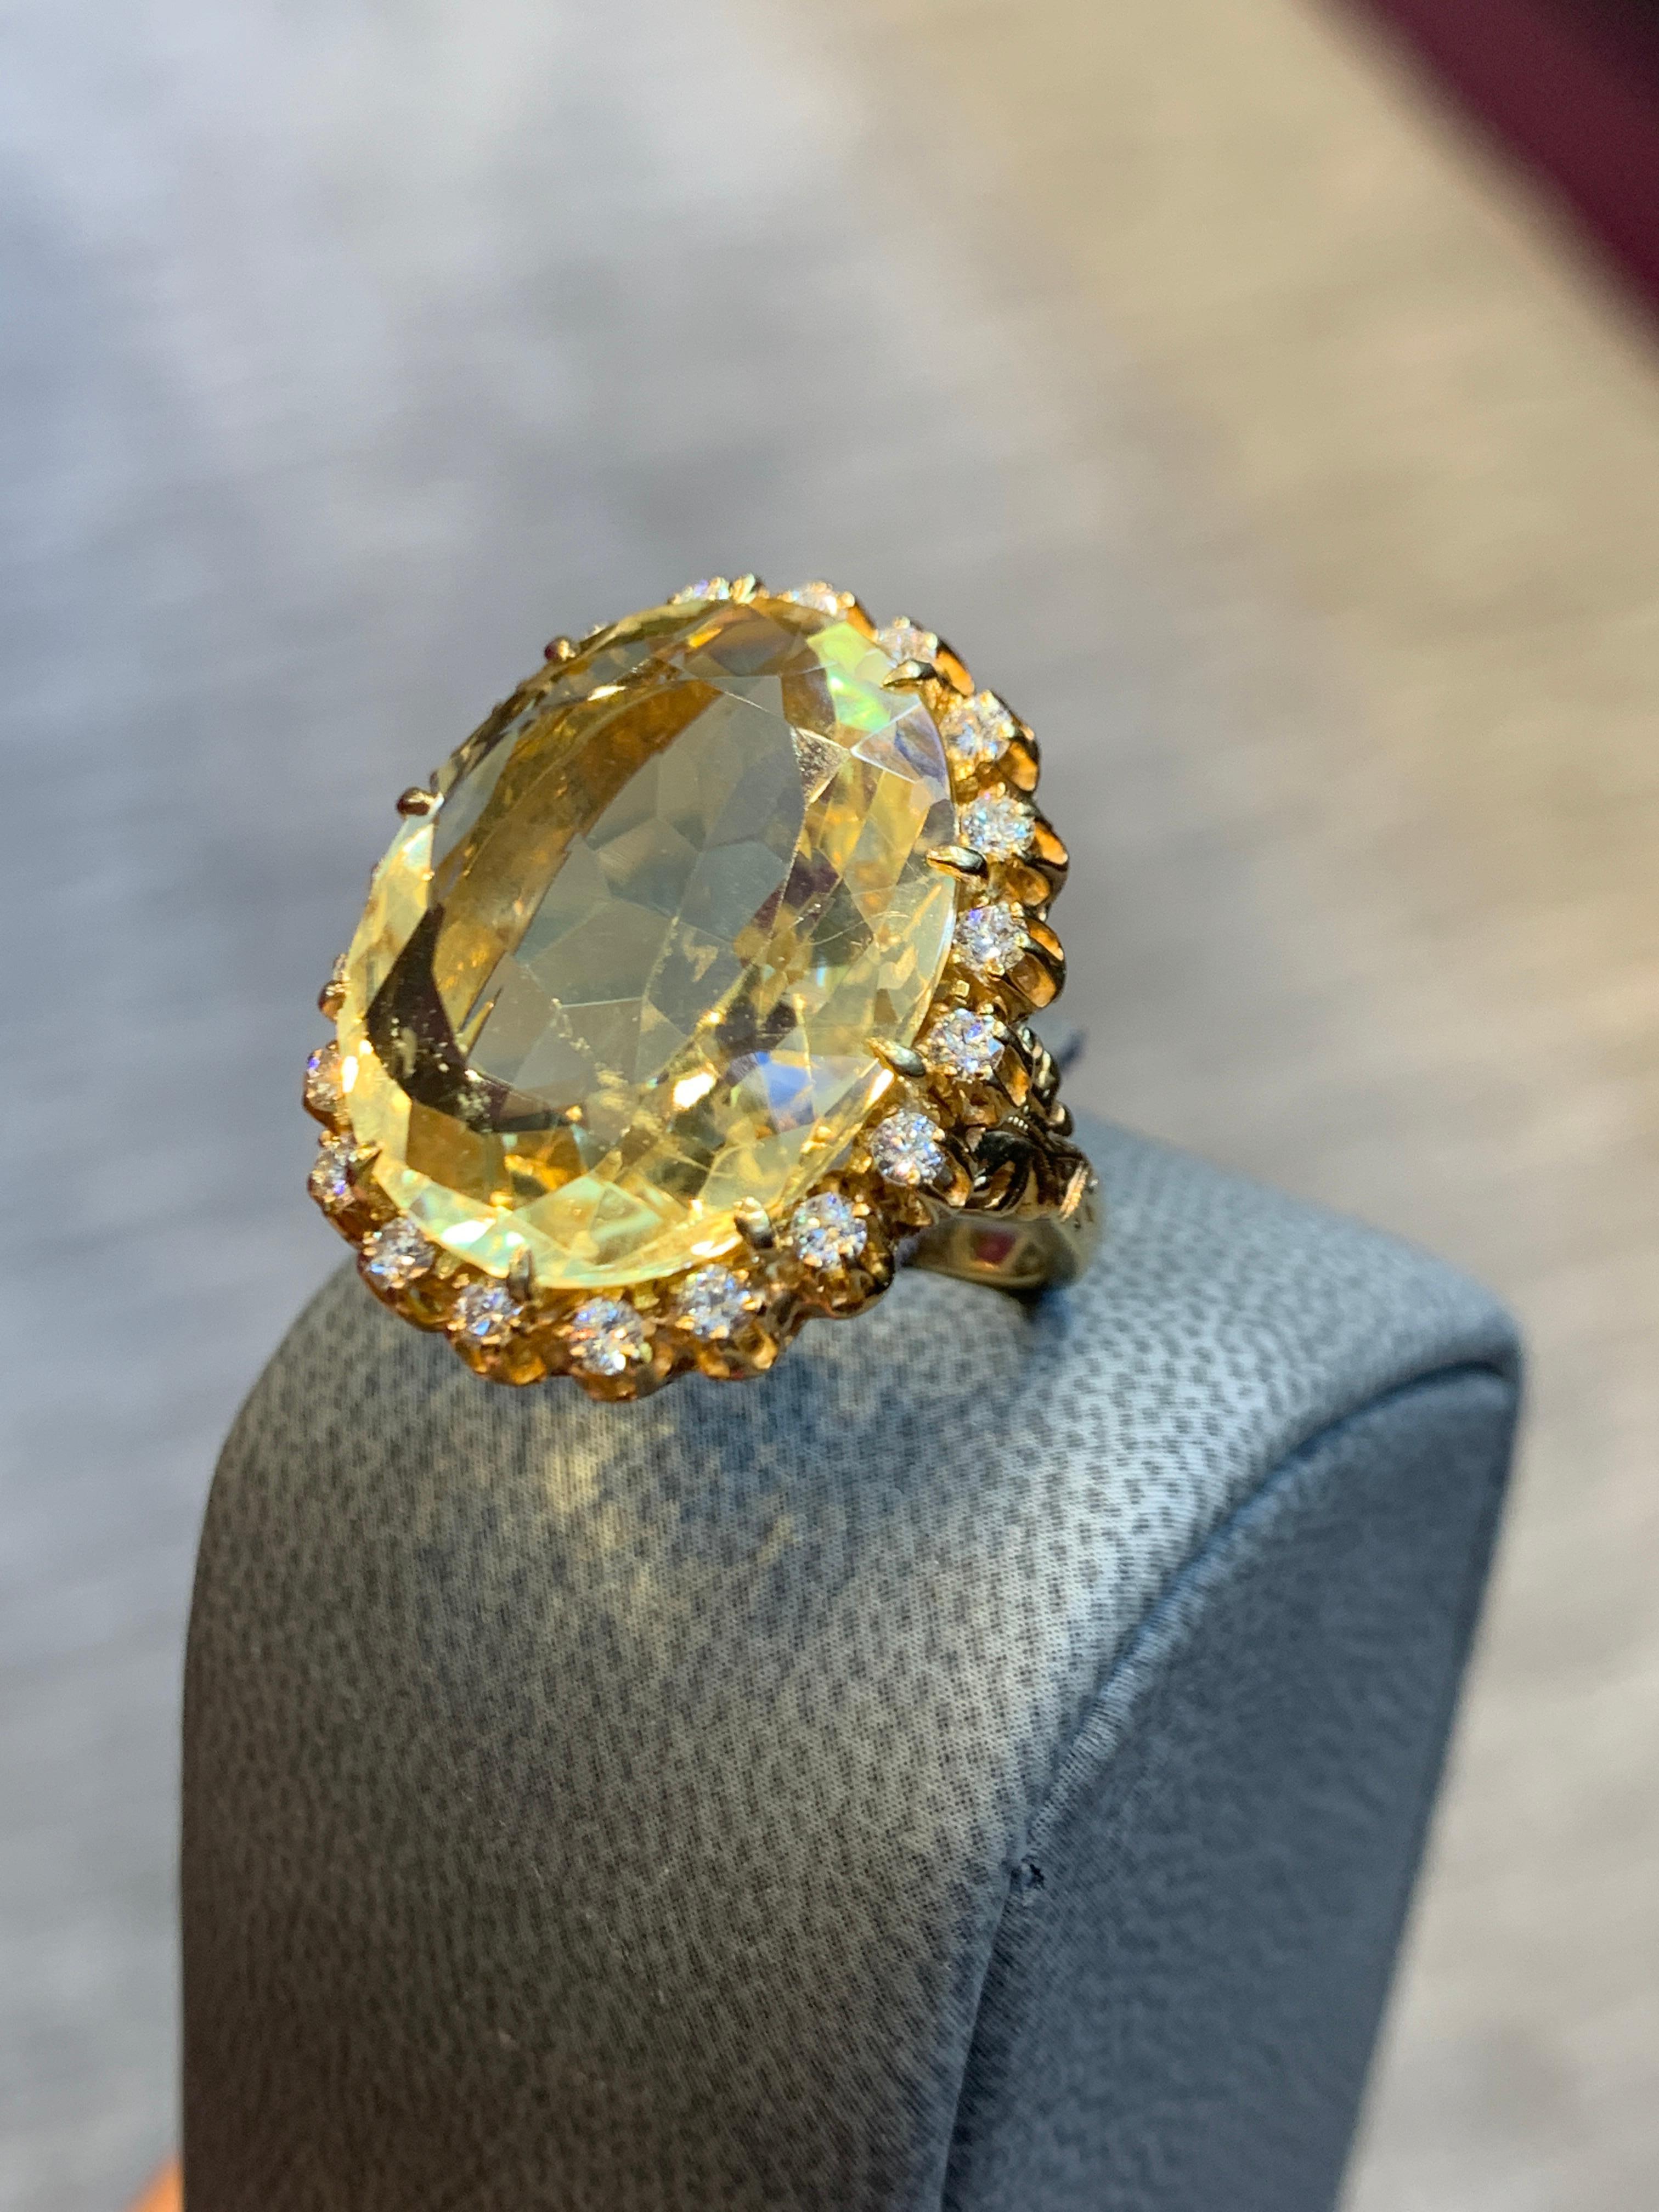  Large Citrine & Diamond Cocktail  Yellow Gold Ring
Ring Size: 7.5 
Citrine Weight: approx 18.00 Cts
Diamond Weight: 1.00 Ct
Re-sizable to any size free or charge 